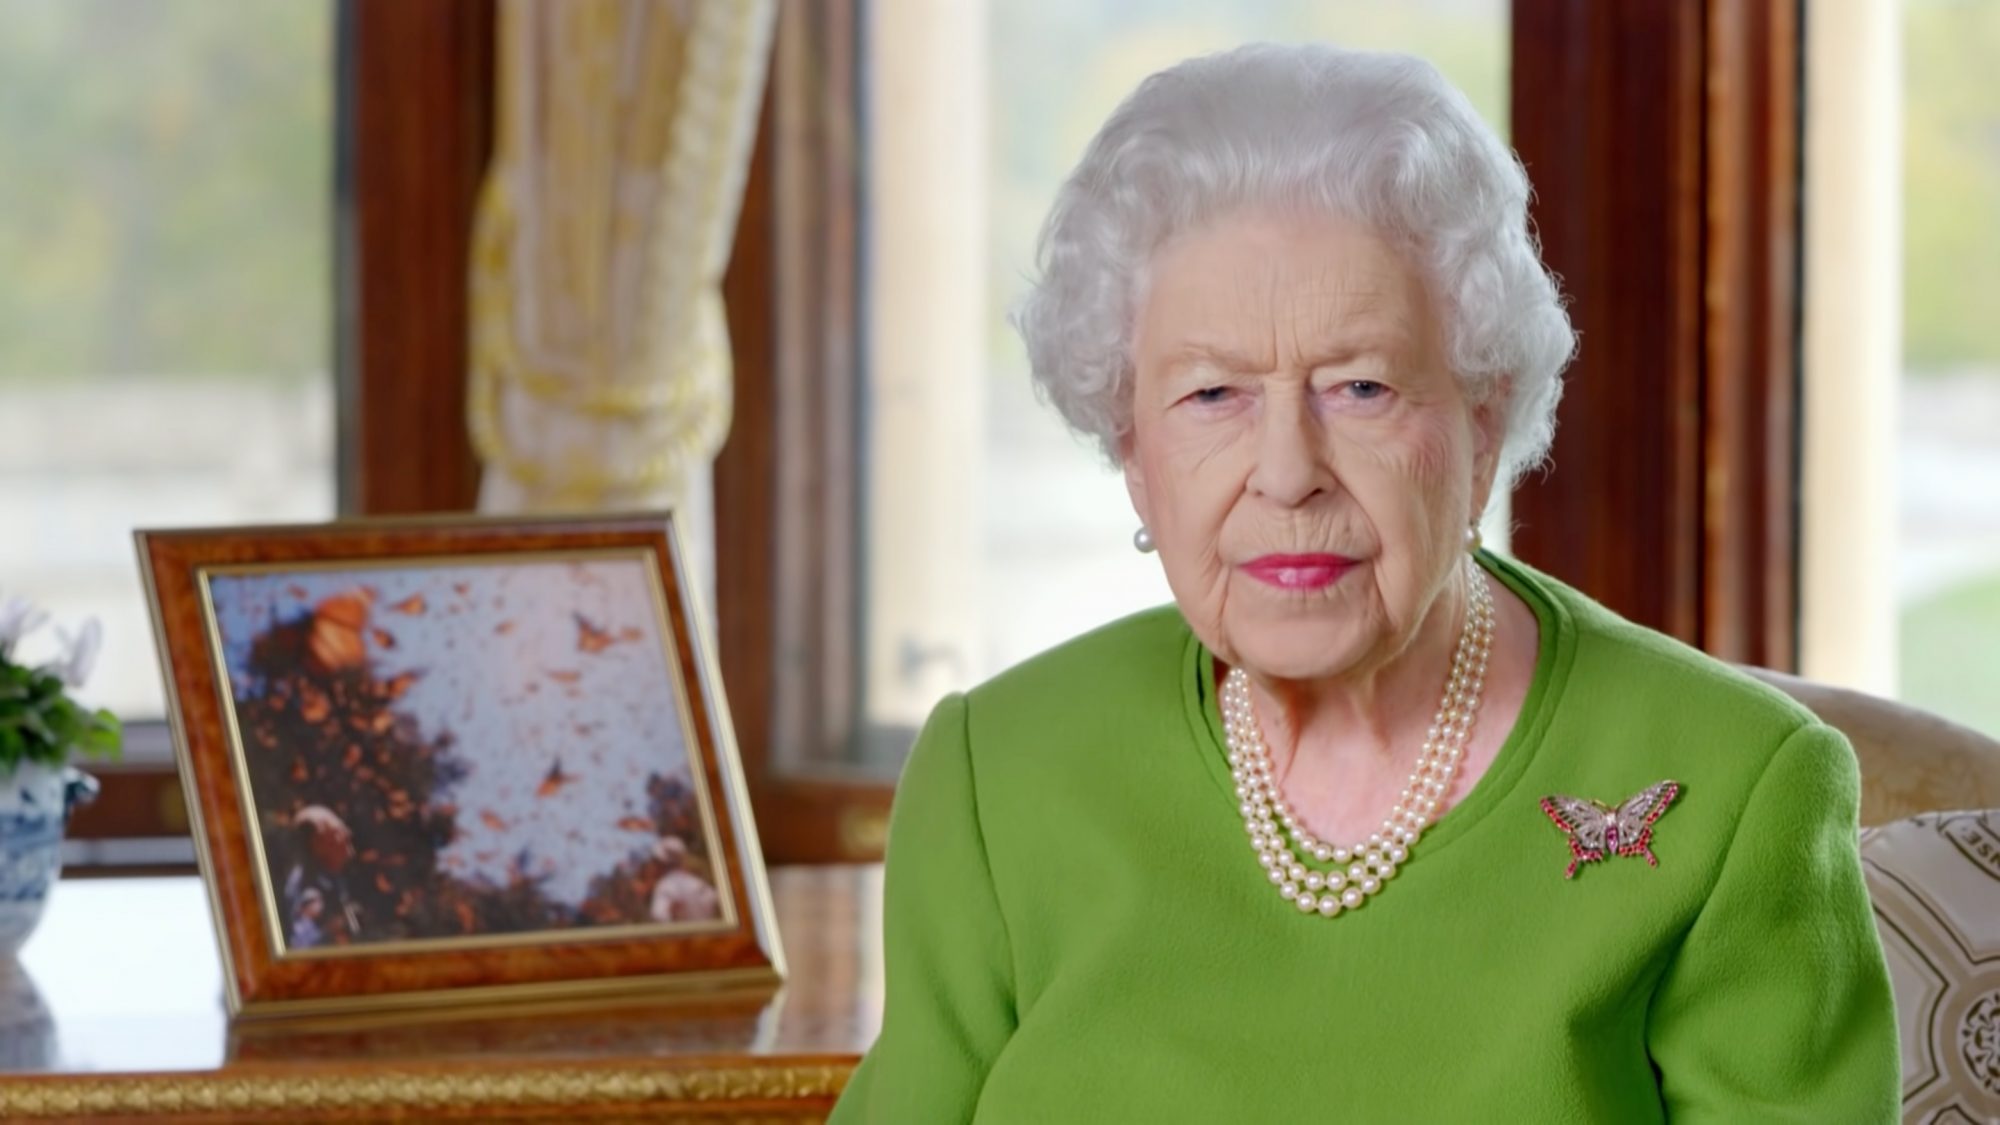 Queen “Could Not Be More Proud” of Family’s Conservation Efforts